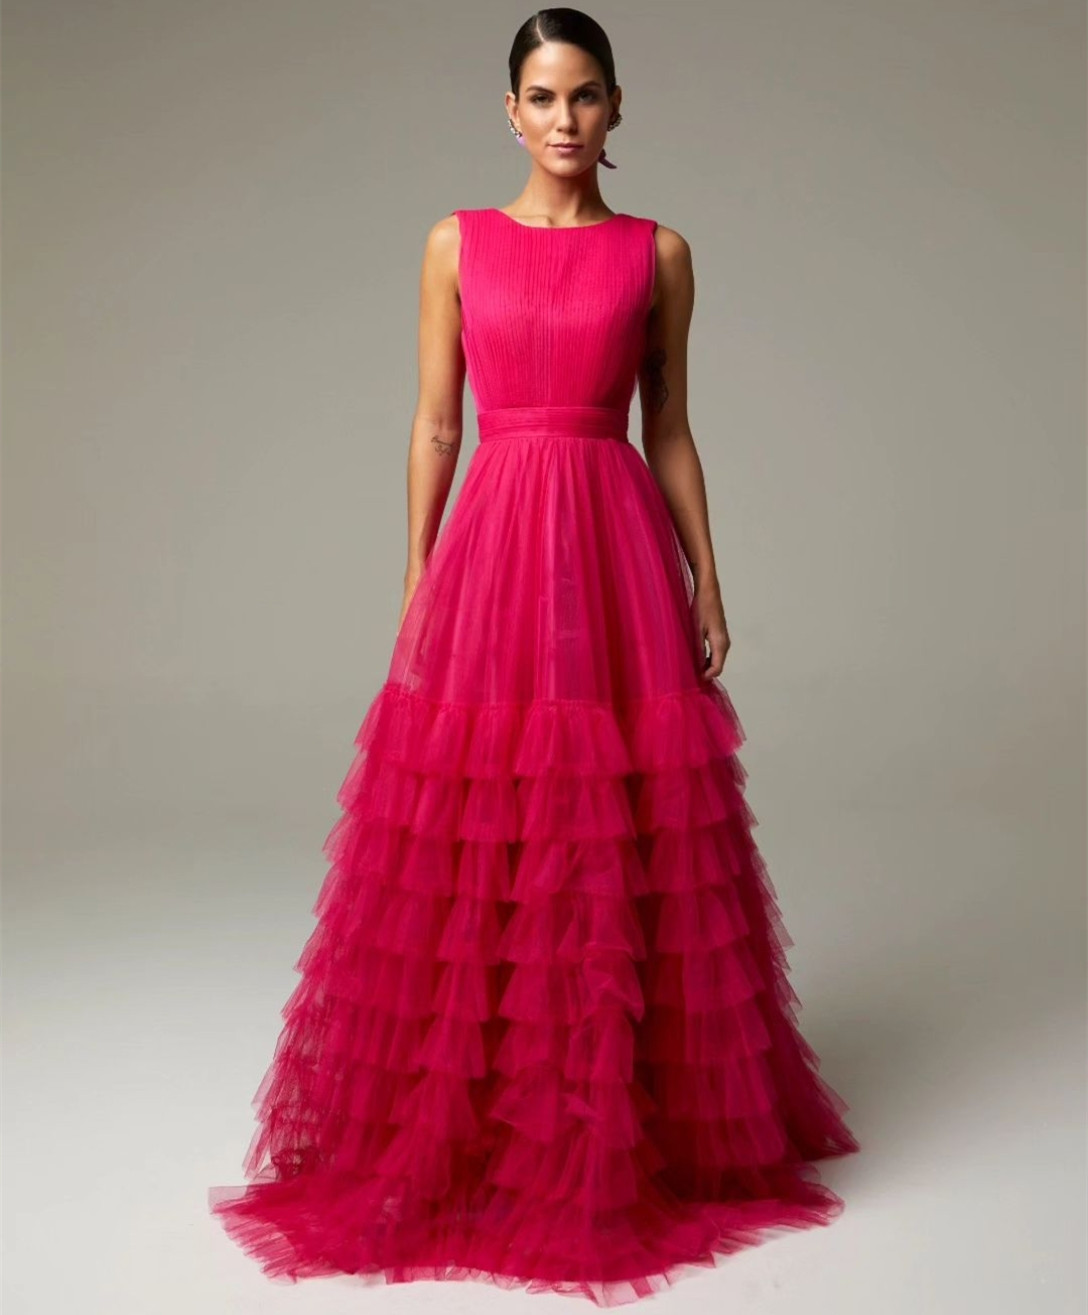 Vintage Long Fuchsia Tulle Evening Dresses With Sash A-Line Jewel Neck Tiered Prom Dress Muslim Floor Length Watteau Train Party Dresses for Women